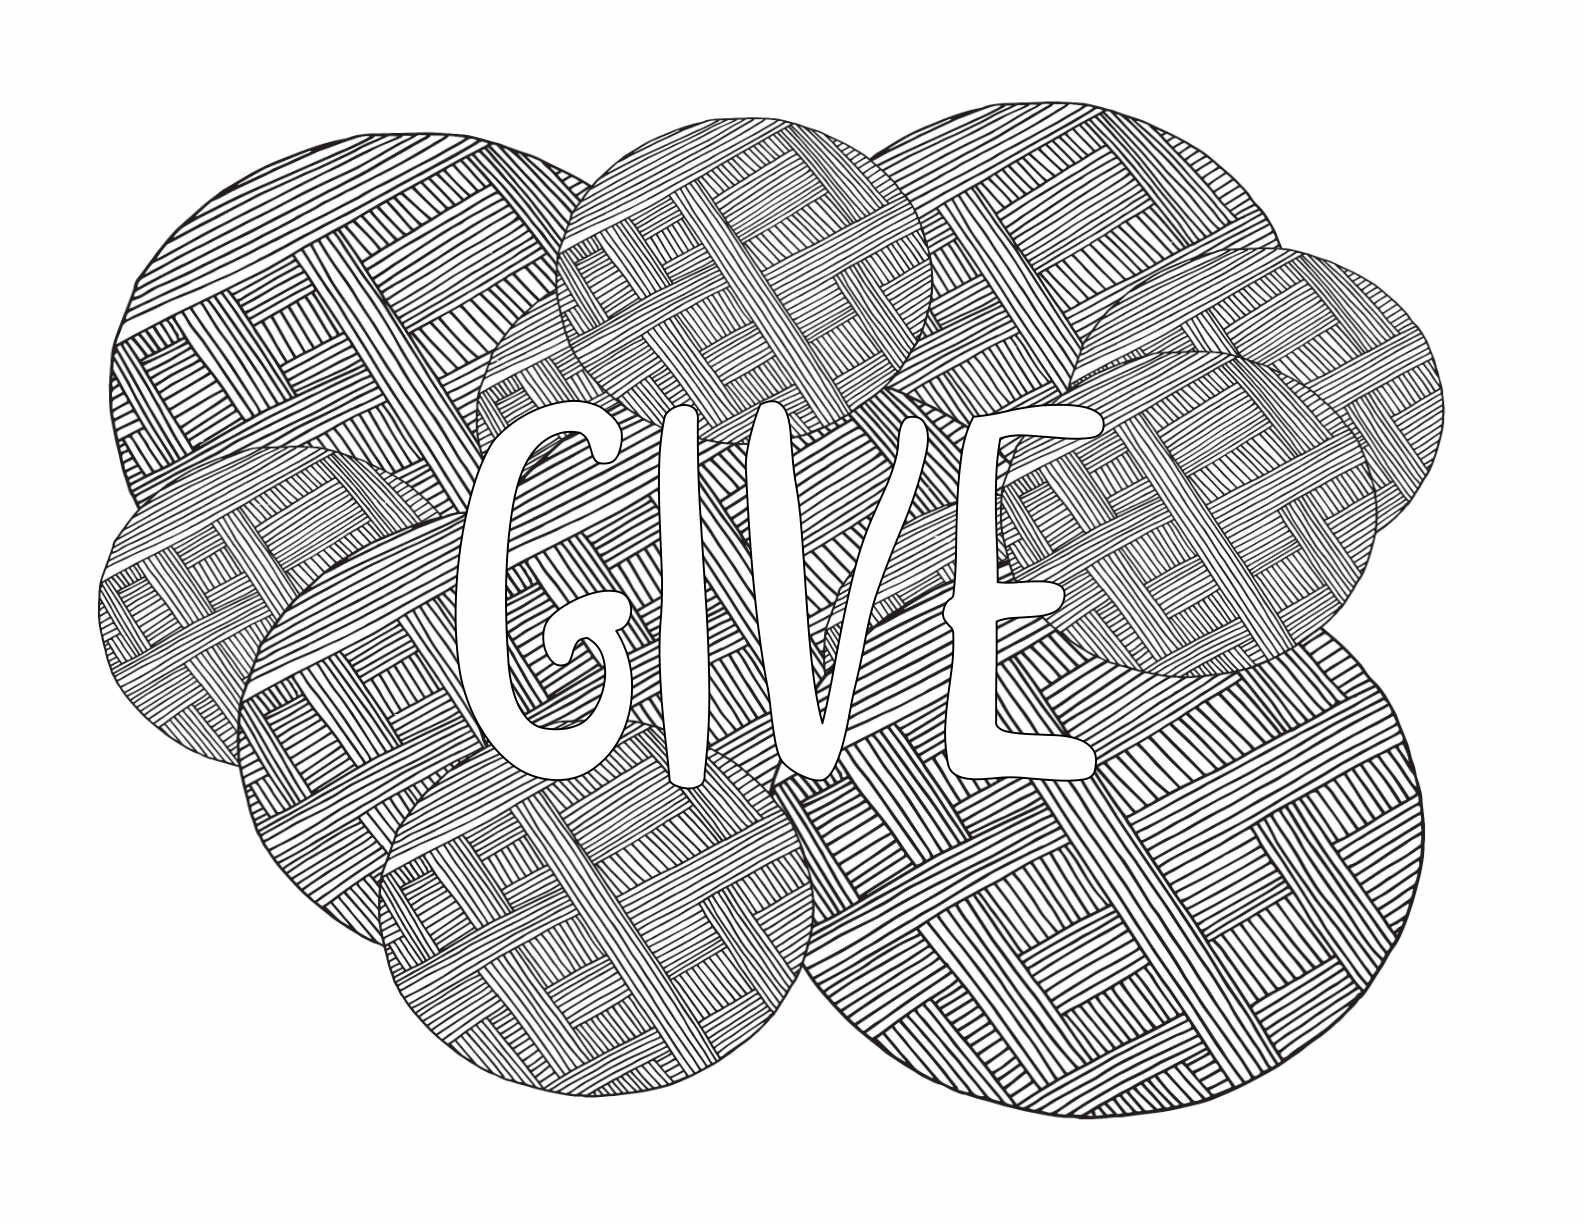 3 Free GIVE Printable Coloring PagesCLICK HERE TO DOWNLOAD THE PAGE ABOVE